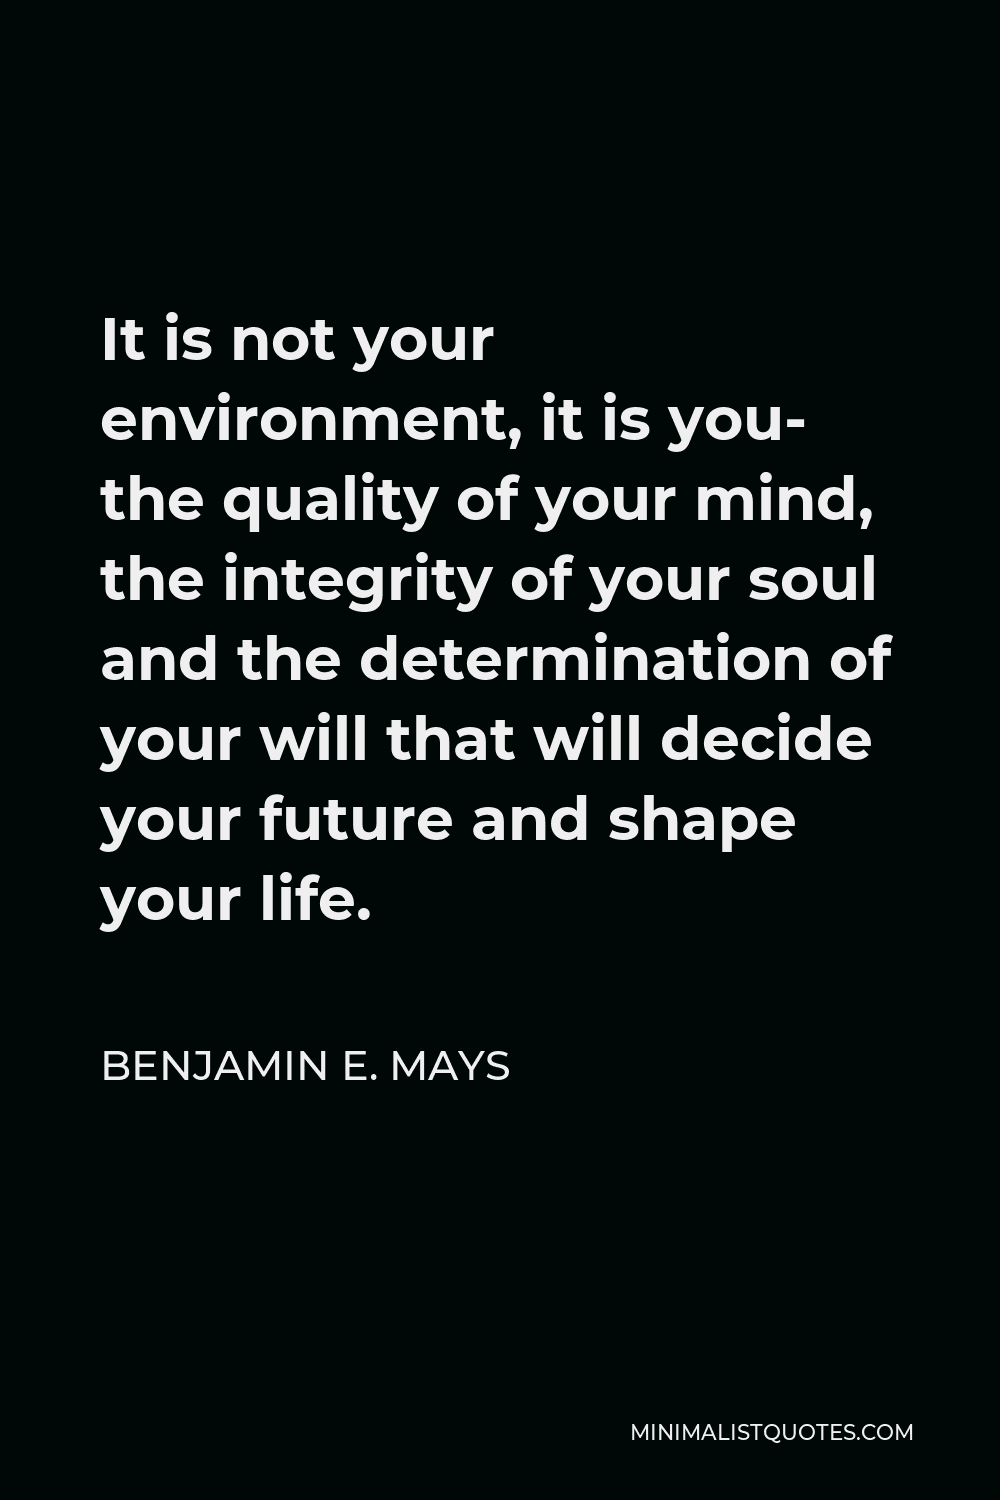 Benjamin E. Mays Quote - It is not your environment, it is you- the quality of your mind, the integrity of your soul and the determination of your will that will decide your future and shape your life.